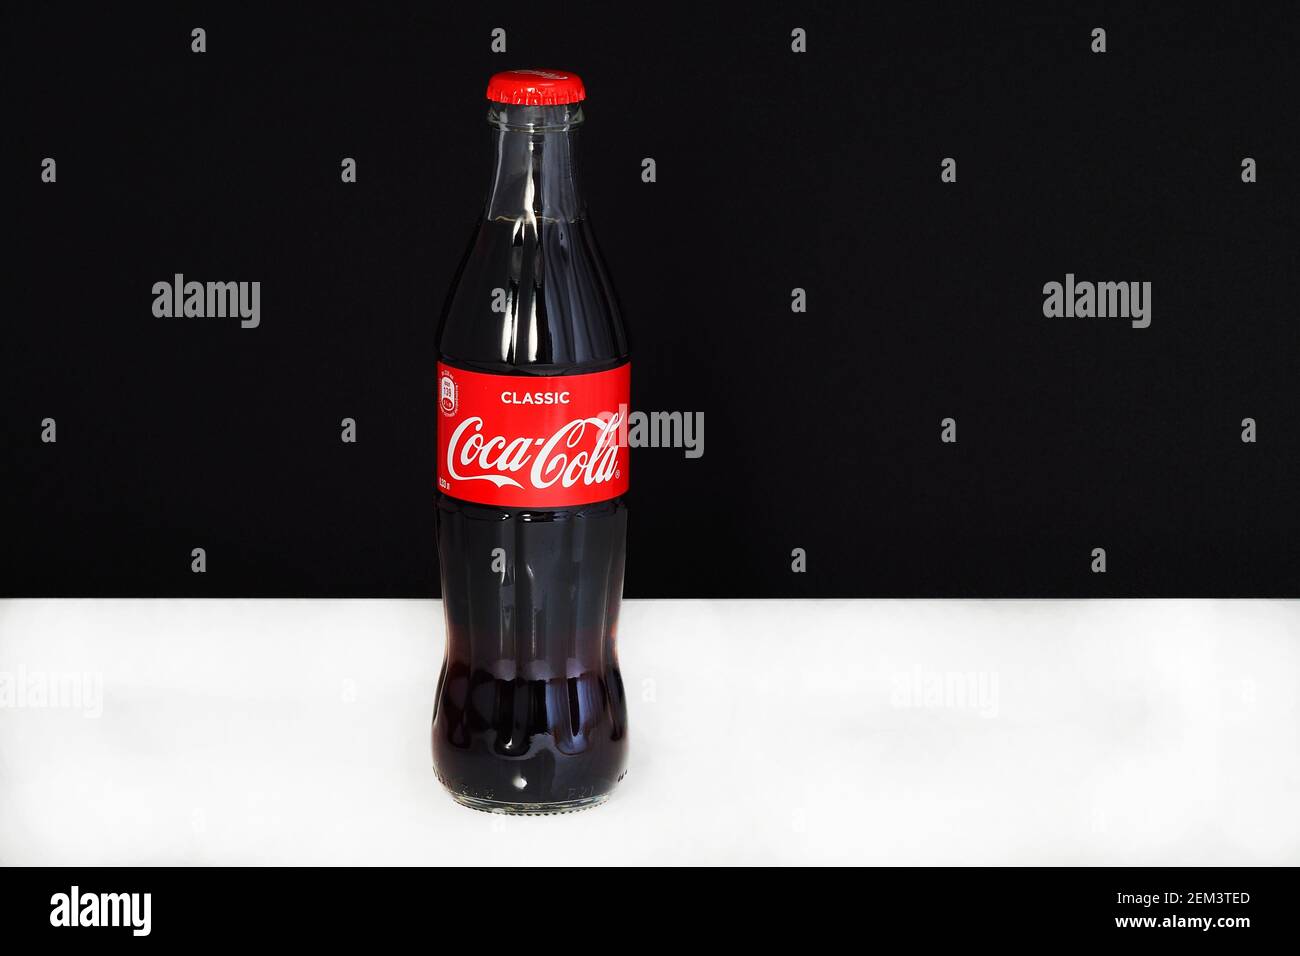 Coca cola in a glass bottle with the logo, isolated, on a black-and-white background. Editorial image. Russia, Nizhniy Stock Photo